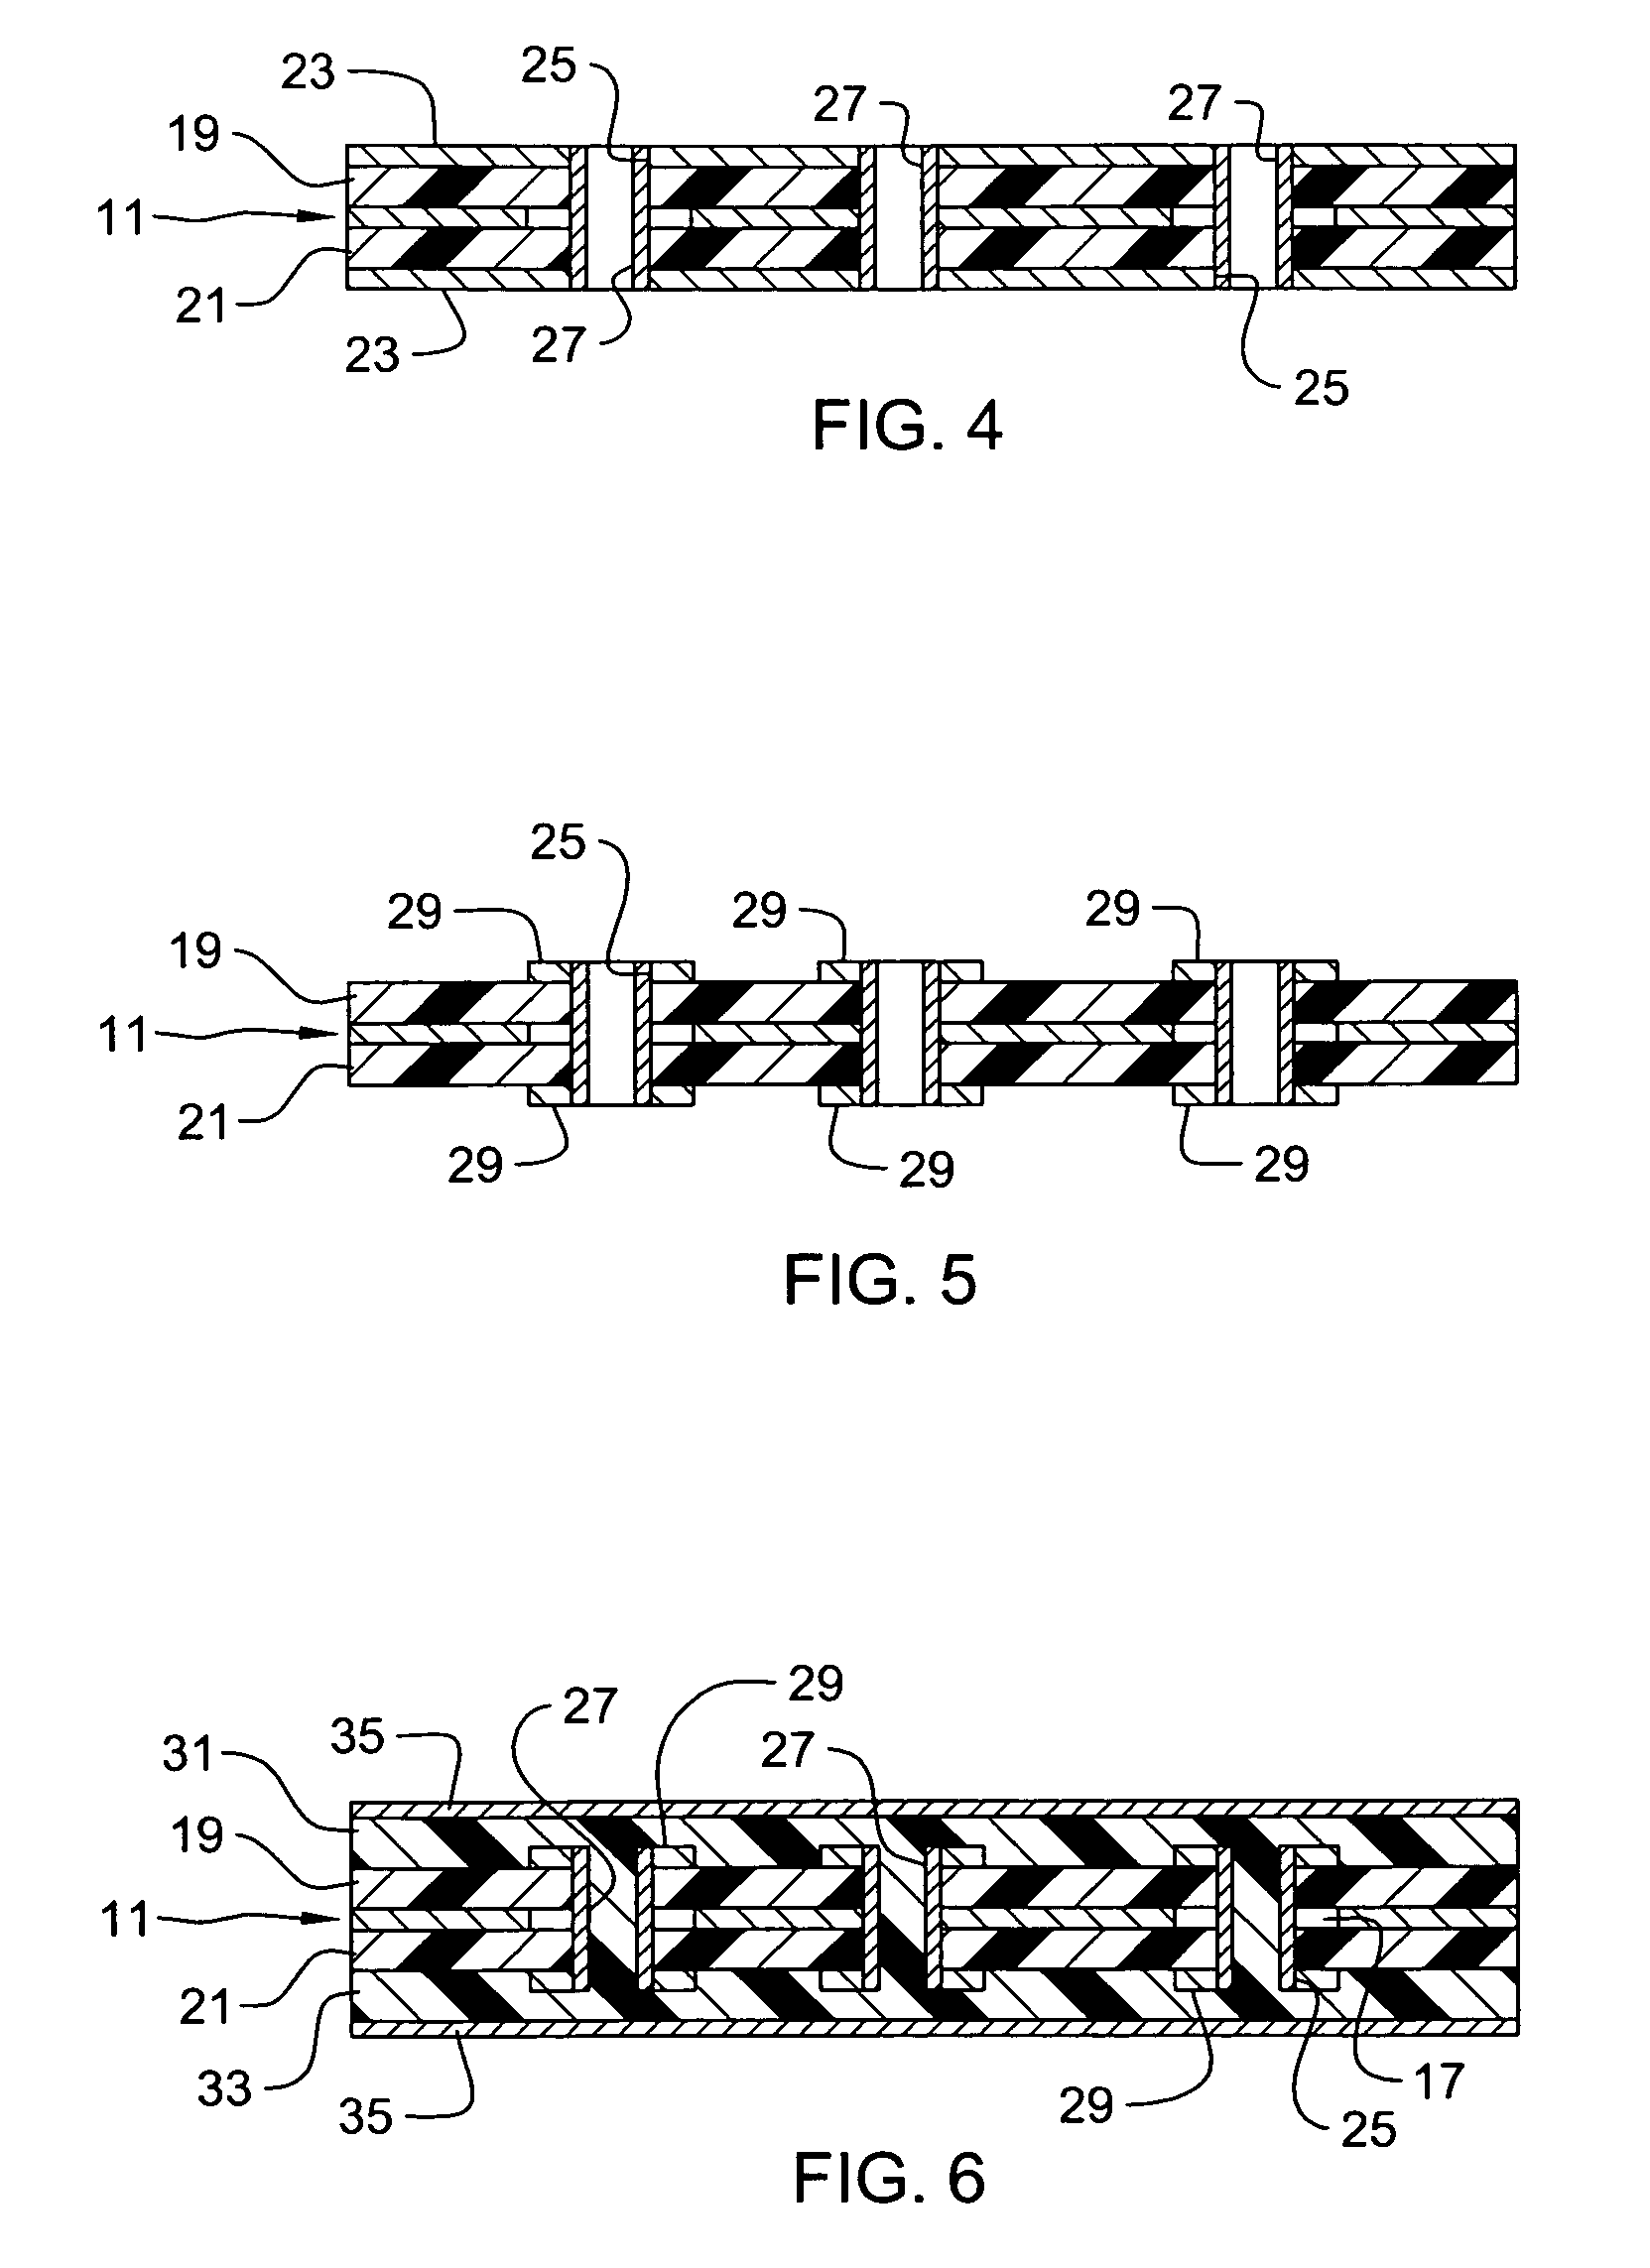 Circuitized substrate and method of making same